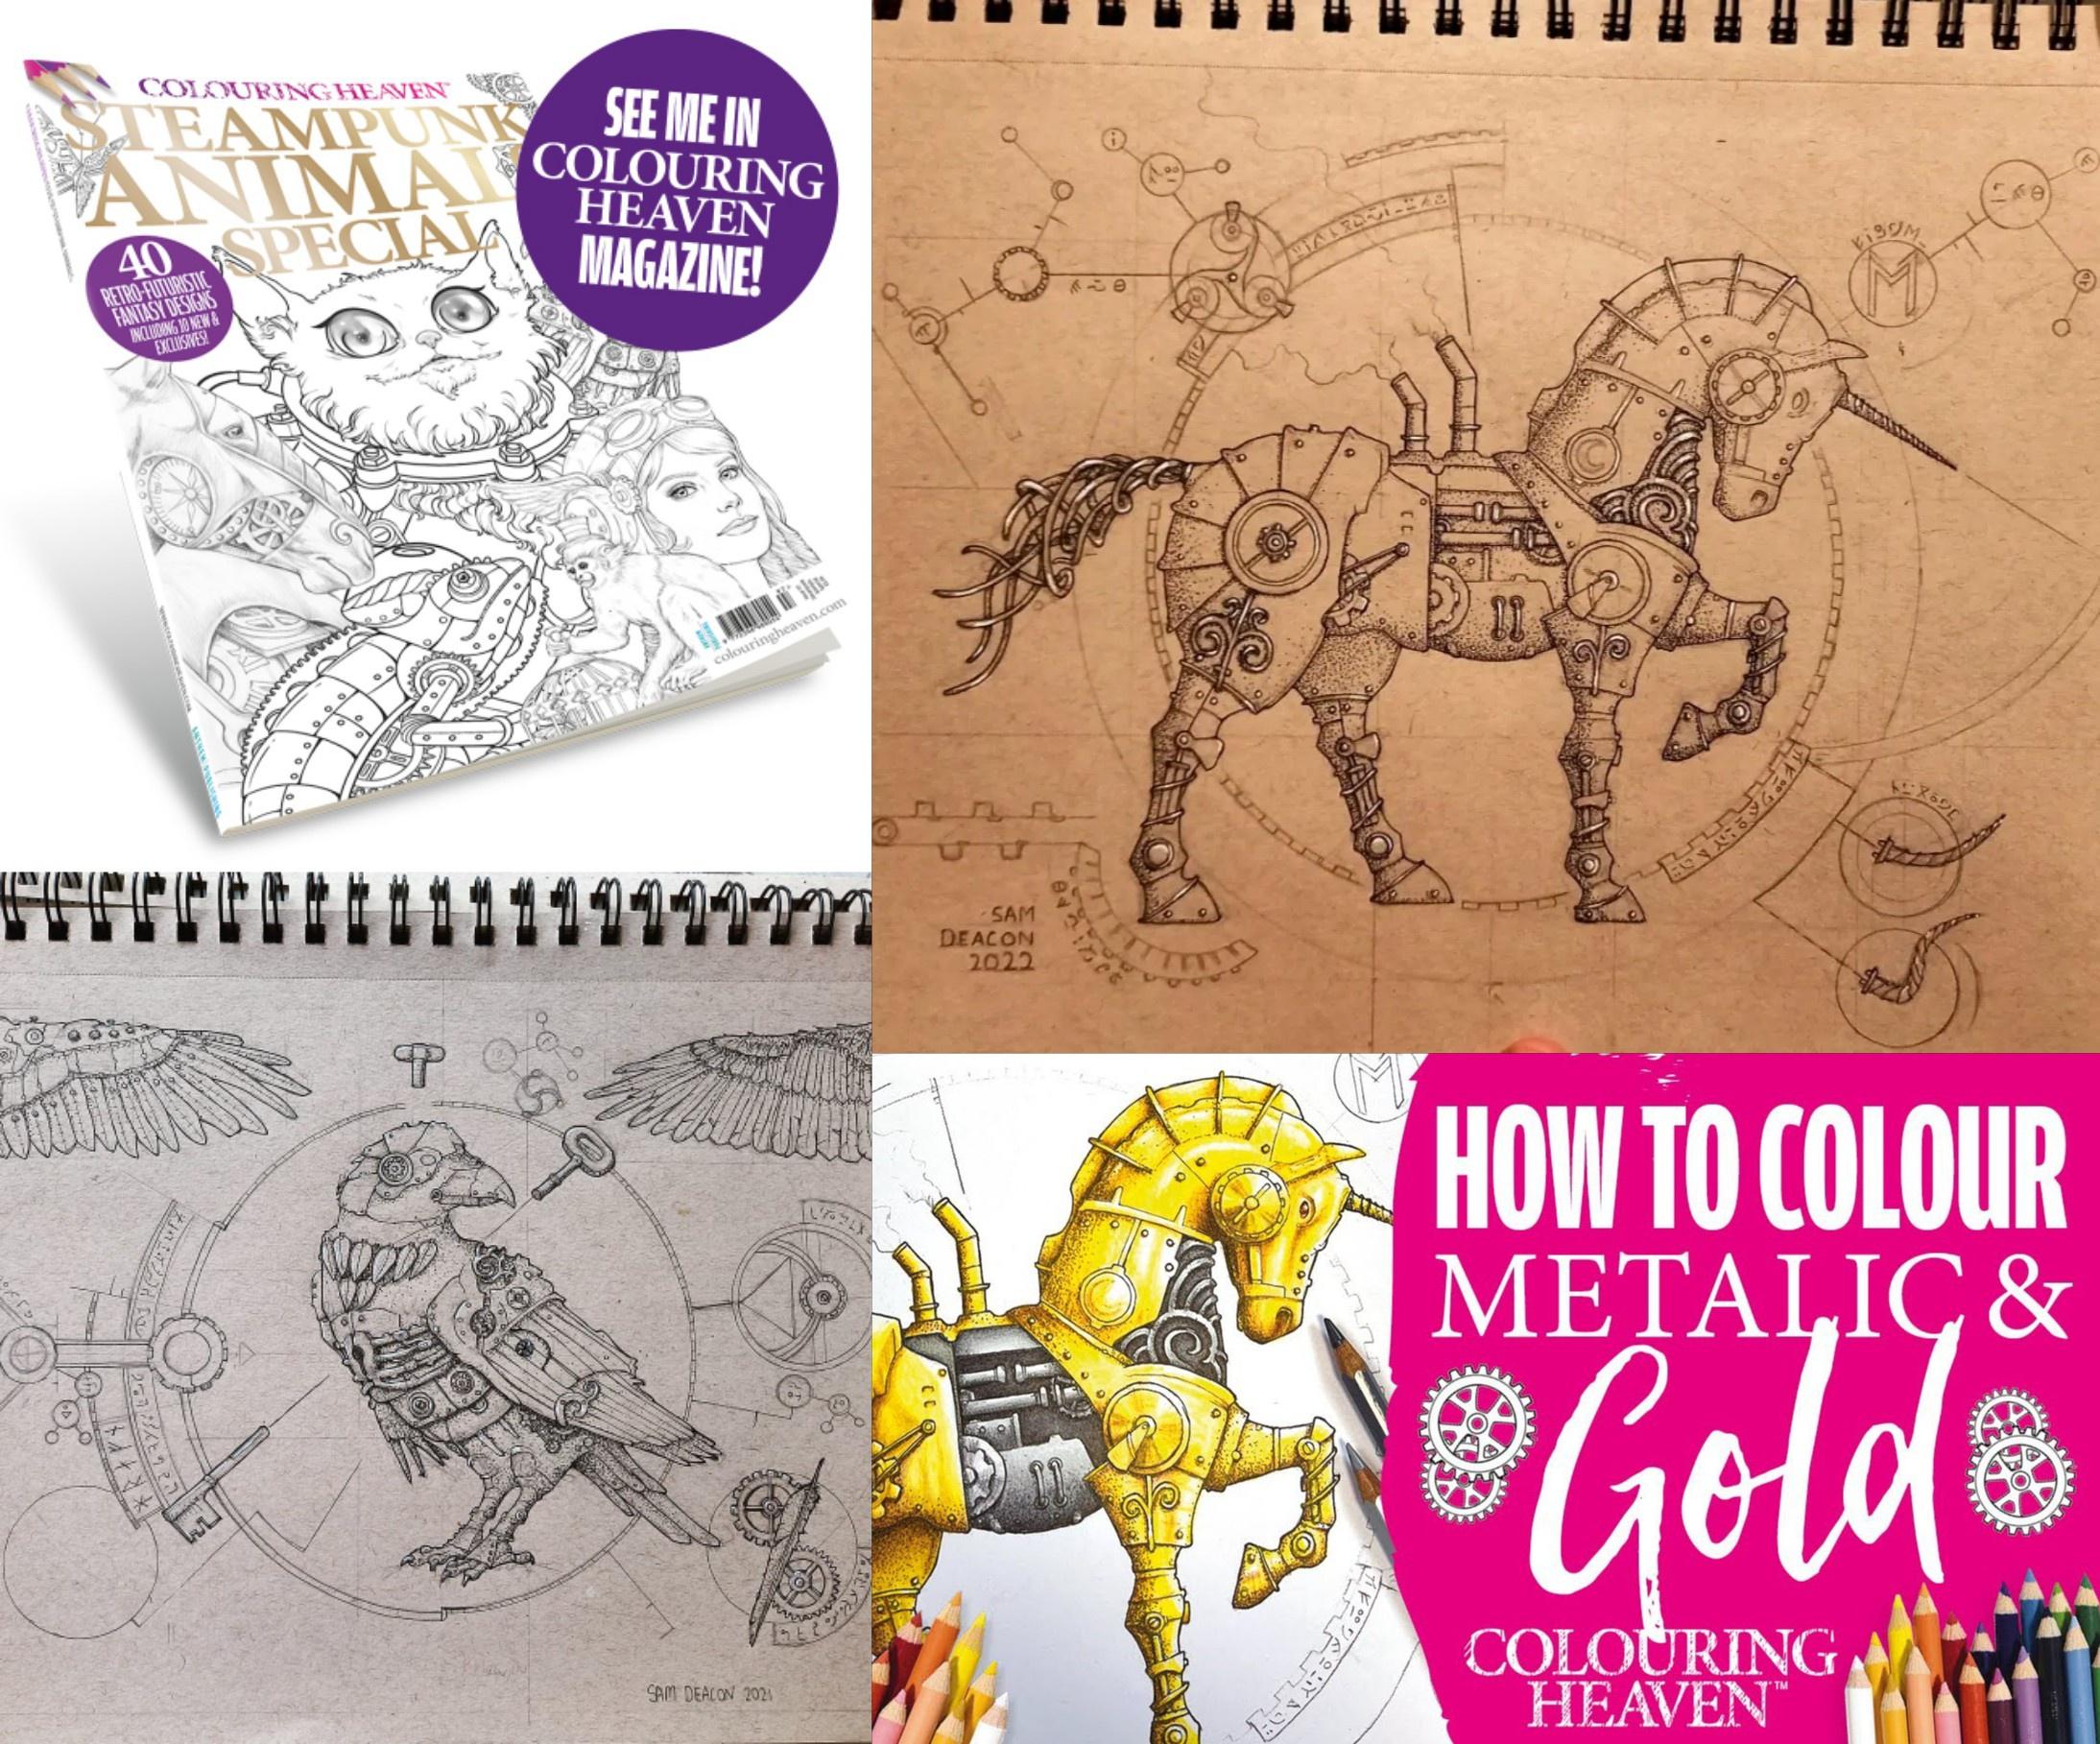 Huzzah! About a of my drawings made it into this months colouring heaven journal model!